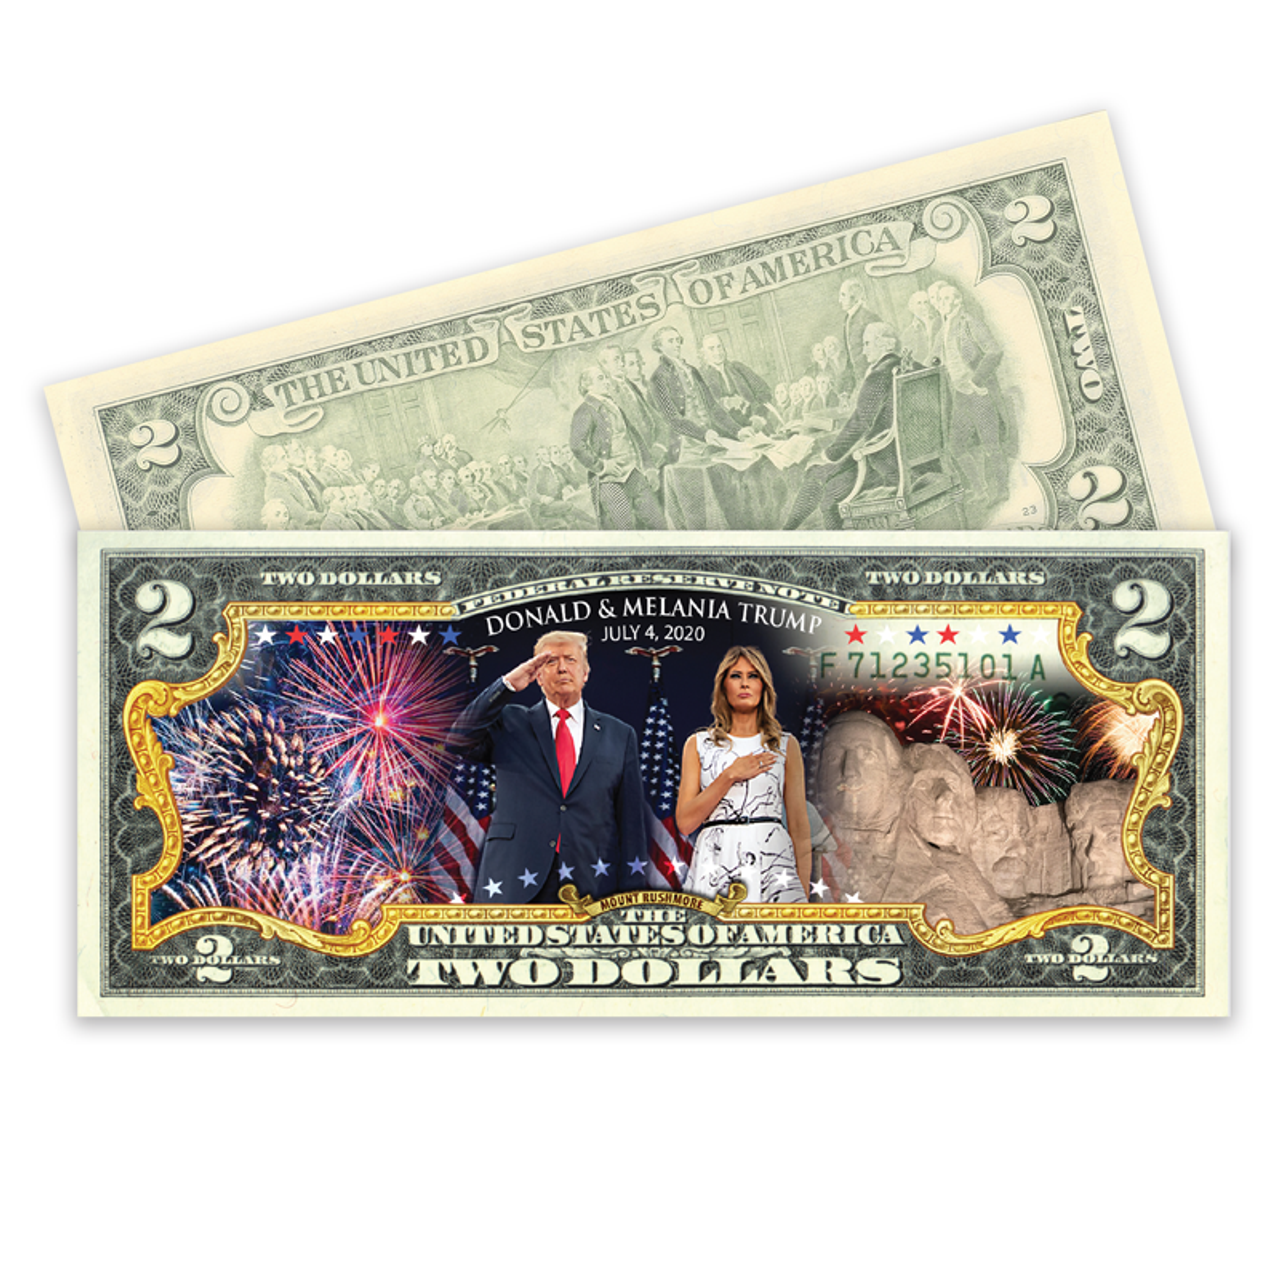 Item name is Mount Rushmore Colorized $2 Bill. Date is Various. Item size is Approximately six and one eighth inches by two and five eighths inches. Item weight and composition is Paper money. Item shape is Rectangular with smooth edge. Mint Mark is N/A. Design elements on obverse are Color image of President Trump and First Lady, Fireworks, Mount Rushmore with fireworks, $2 denomination. Design elements on reverse are Depiction of the signing of the Declaration of Independence, two dollar denominations, In God We Trust. The item's condition is Crisp Uncirculated. The item's color is Full Color Art.